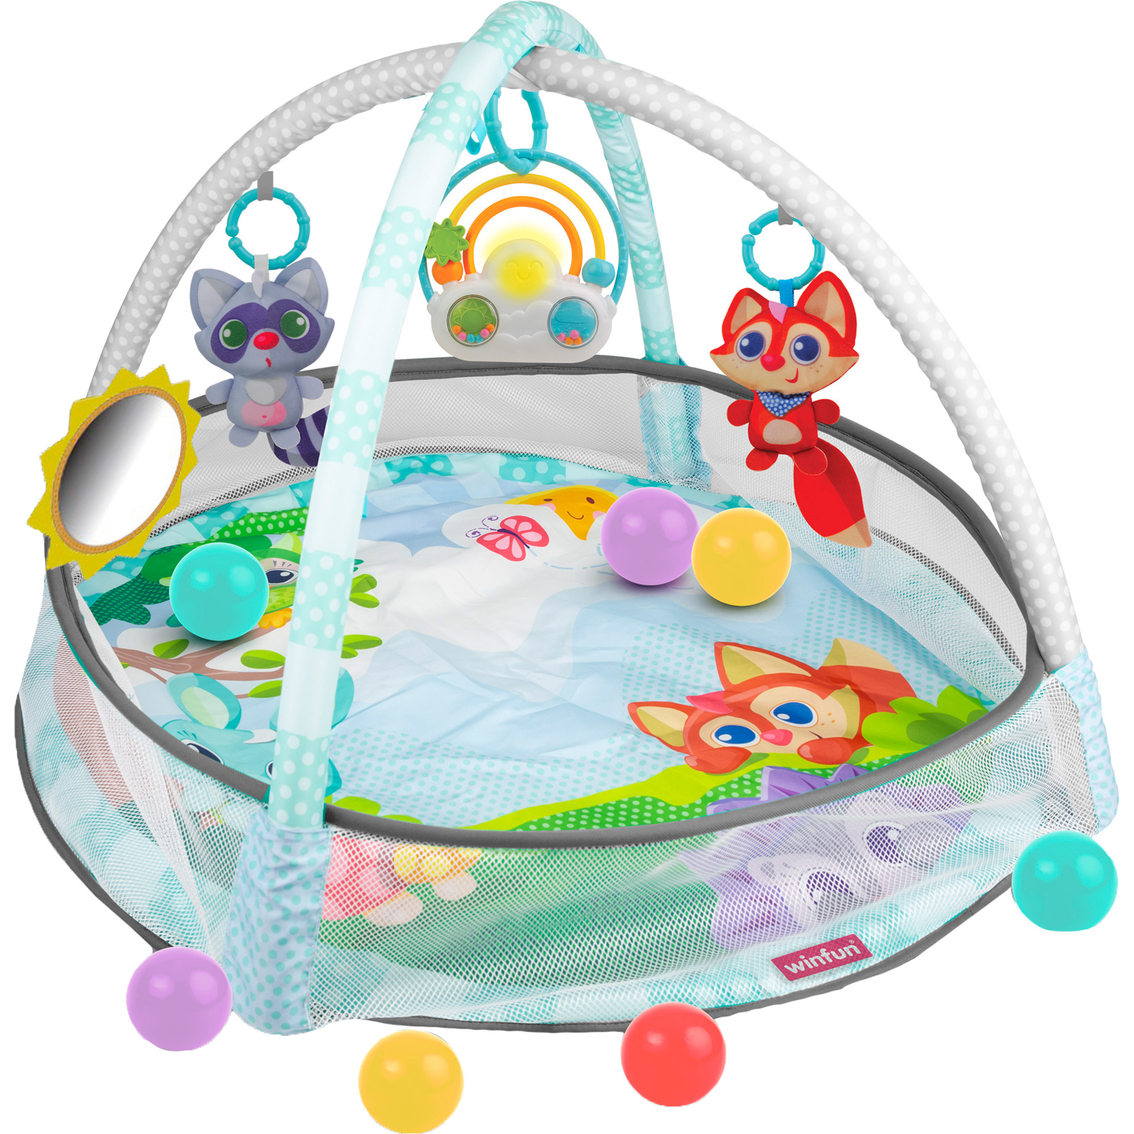 Winfun Play Space Play Gym and Ball Pit